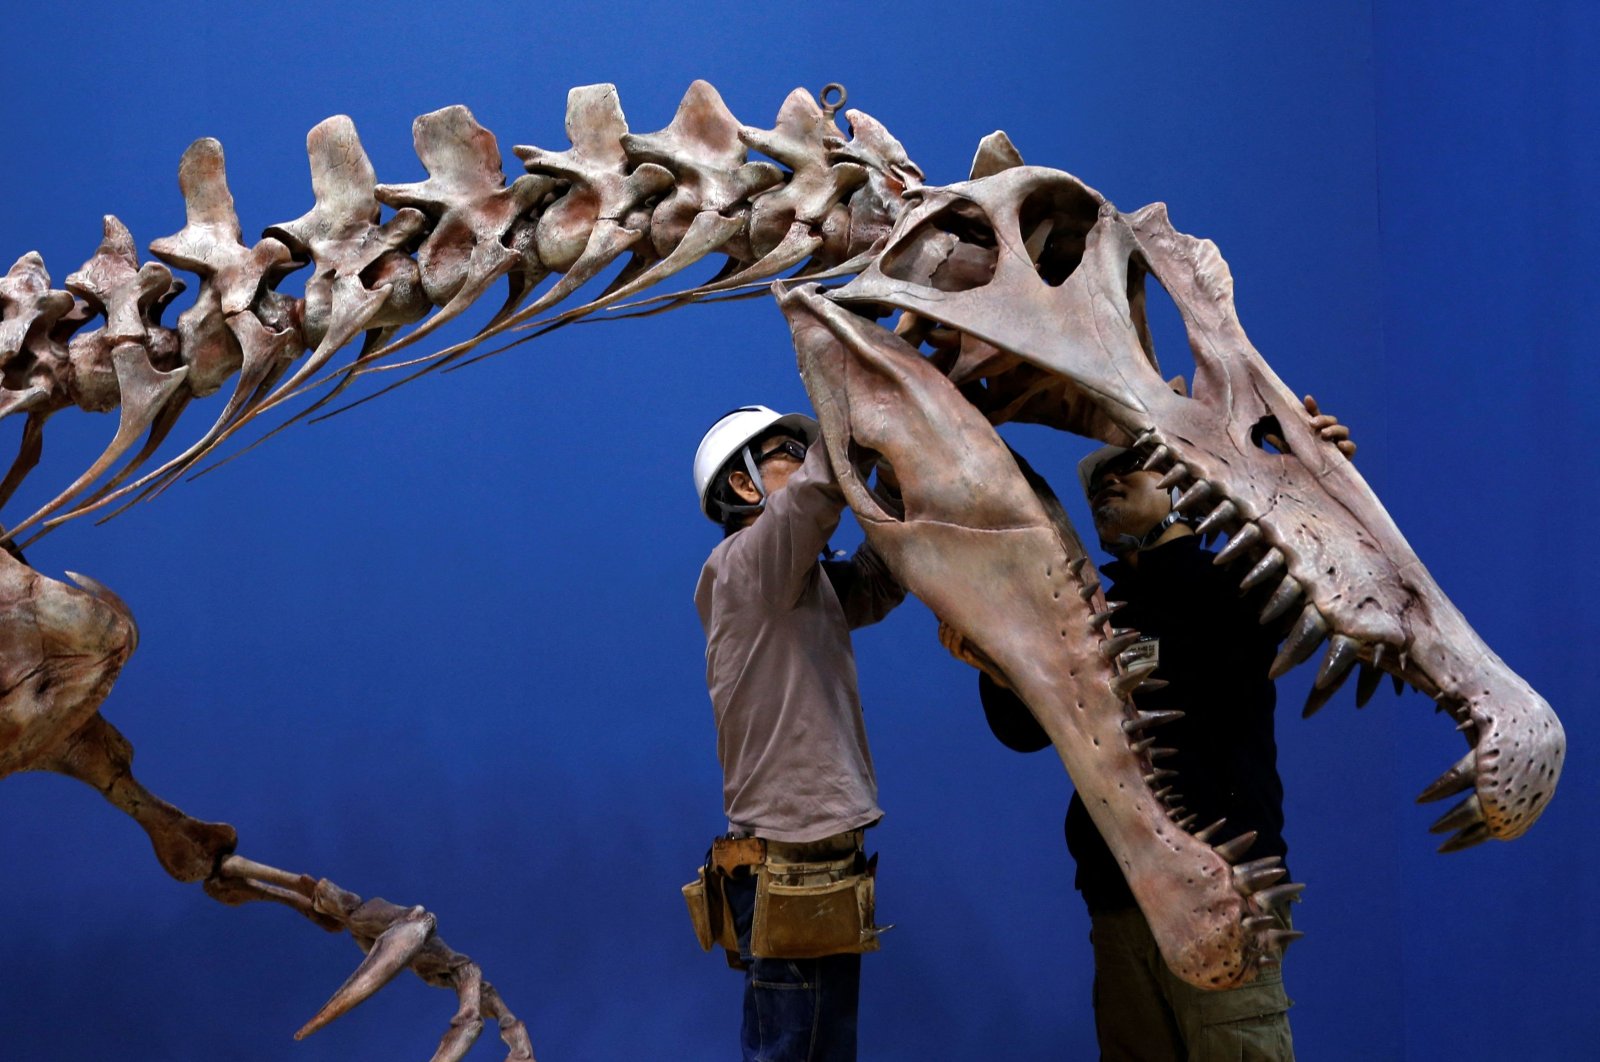 Workers adjust a Spinosaurus skeleton replica during a preparation and media preview for the Dinosaur EXPO at the National Museum of Nature and Science in Tokyo, Japan, March 1, 2016. (Reuters Photo)